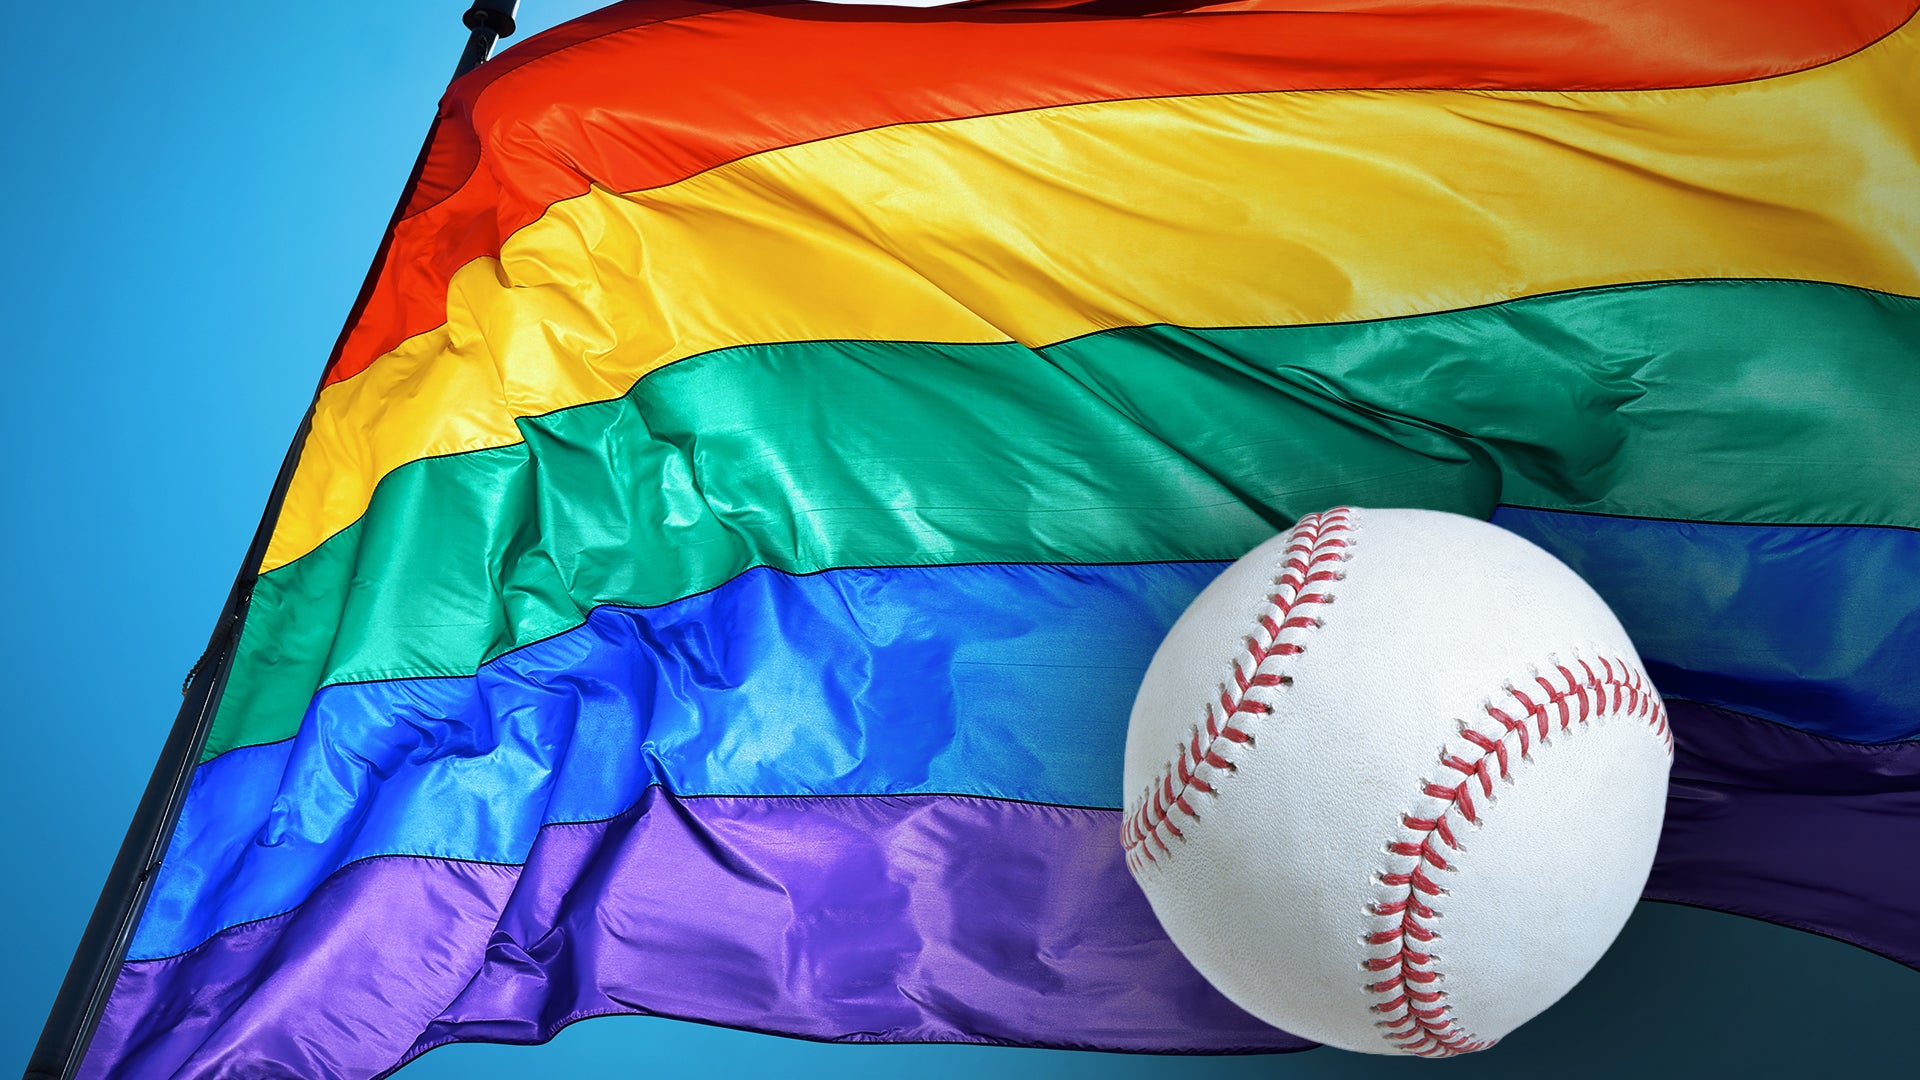 Milwaukee Brewers Promote Pride Month by Hosting a Pre-Game Drag Queen Show